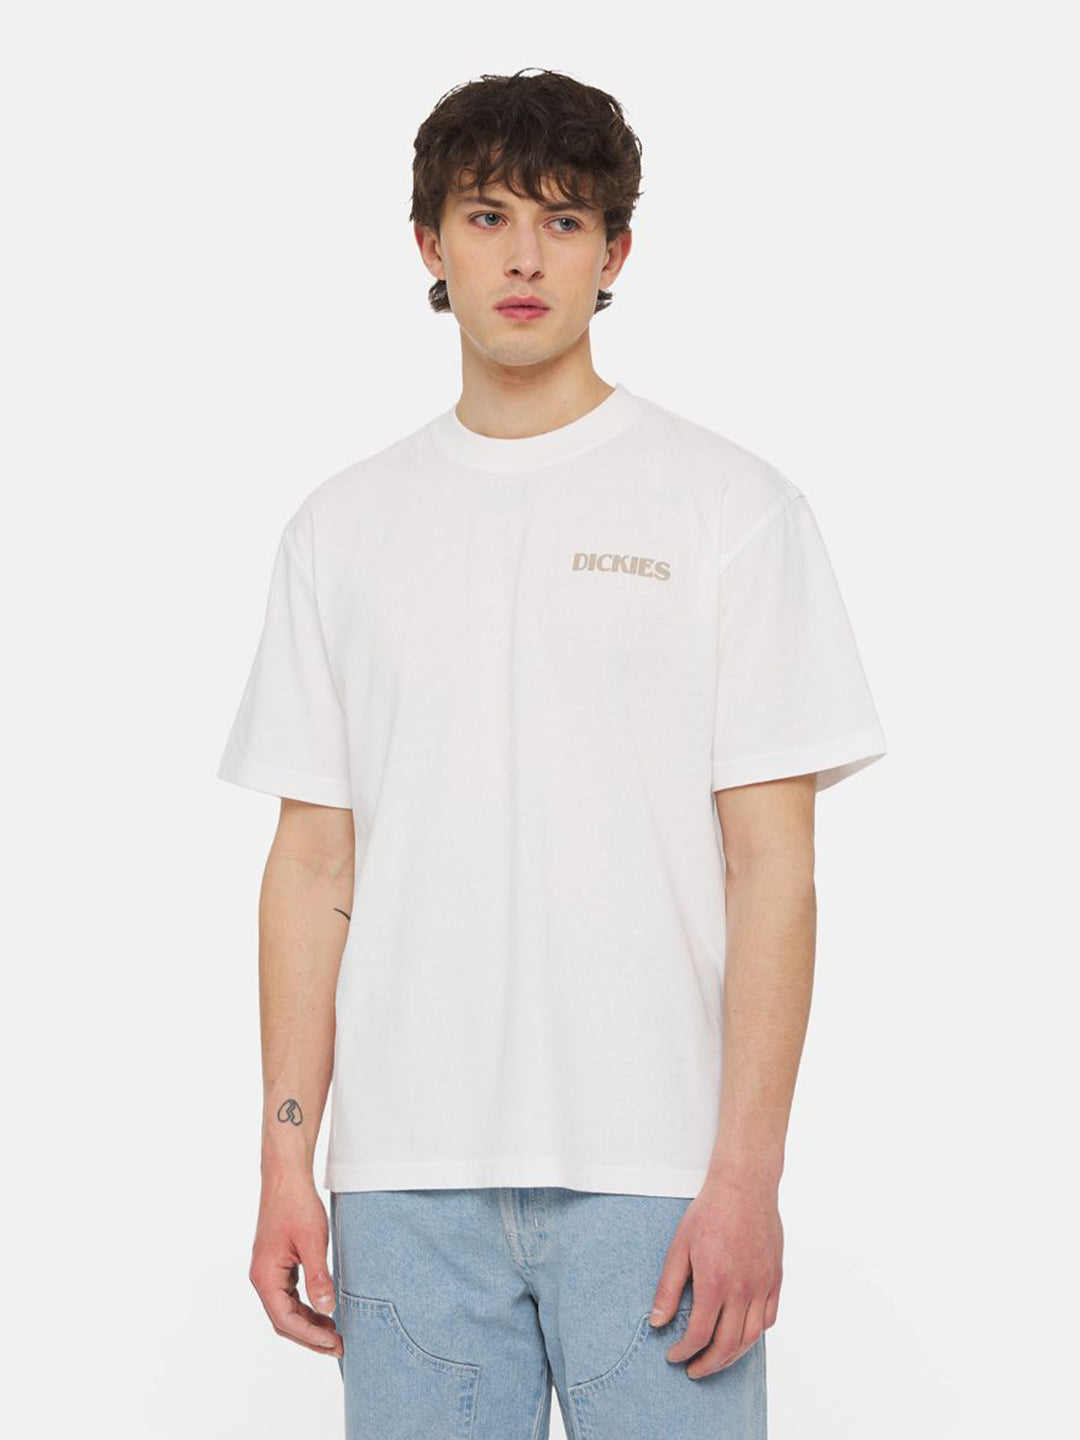 Dickies t-shirt Herndon bianco con stampa floreale